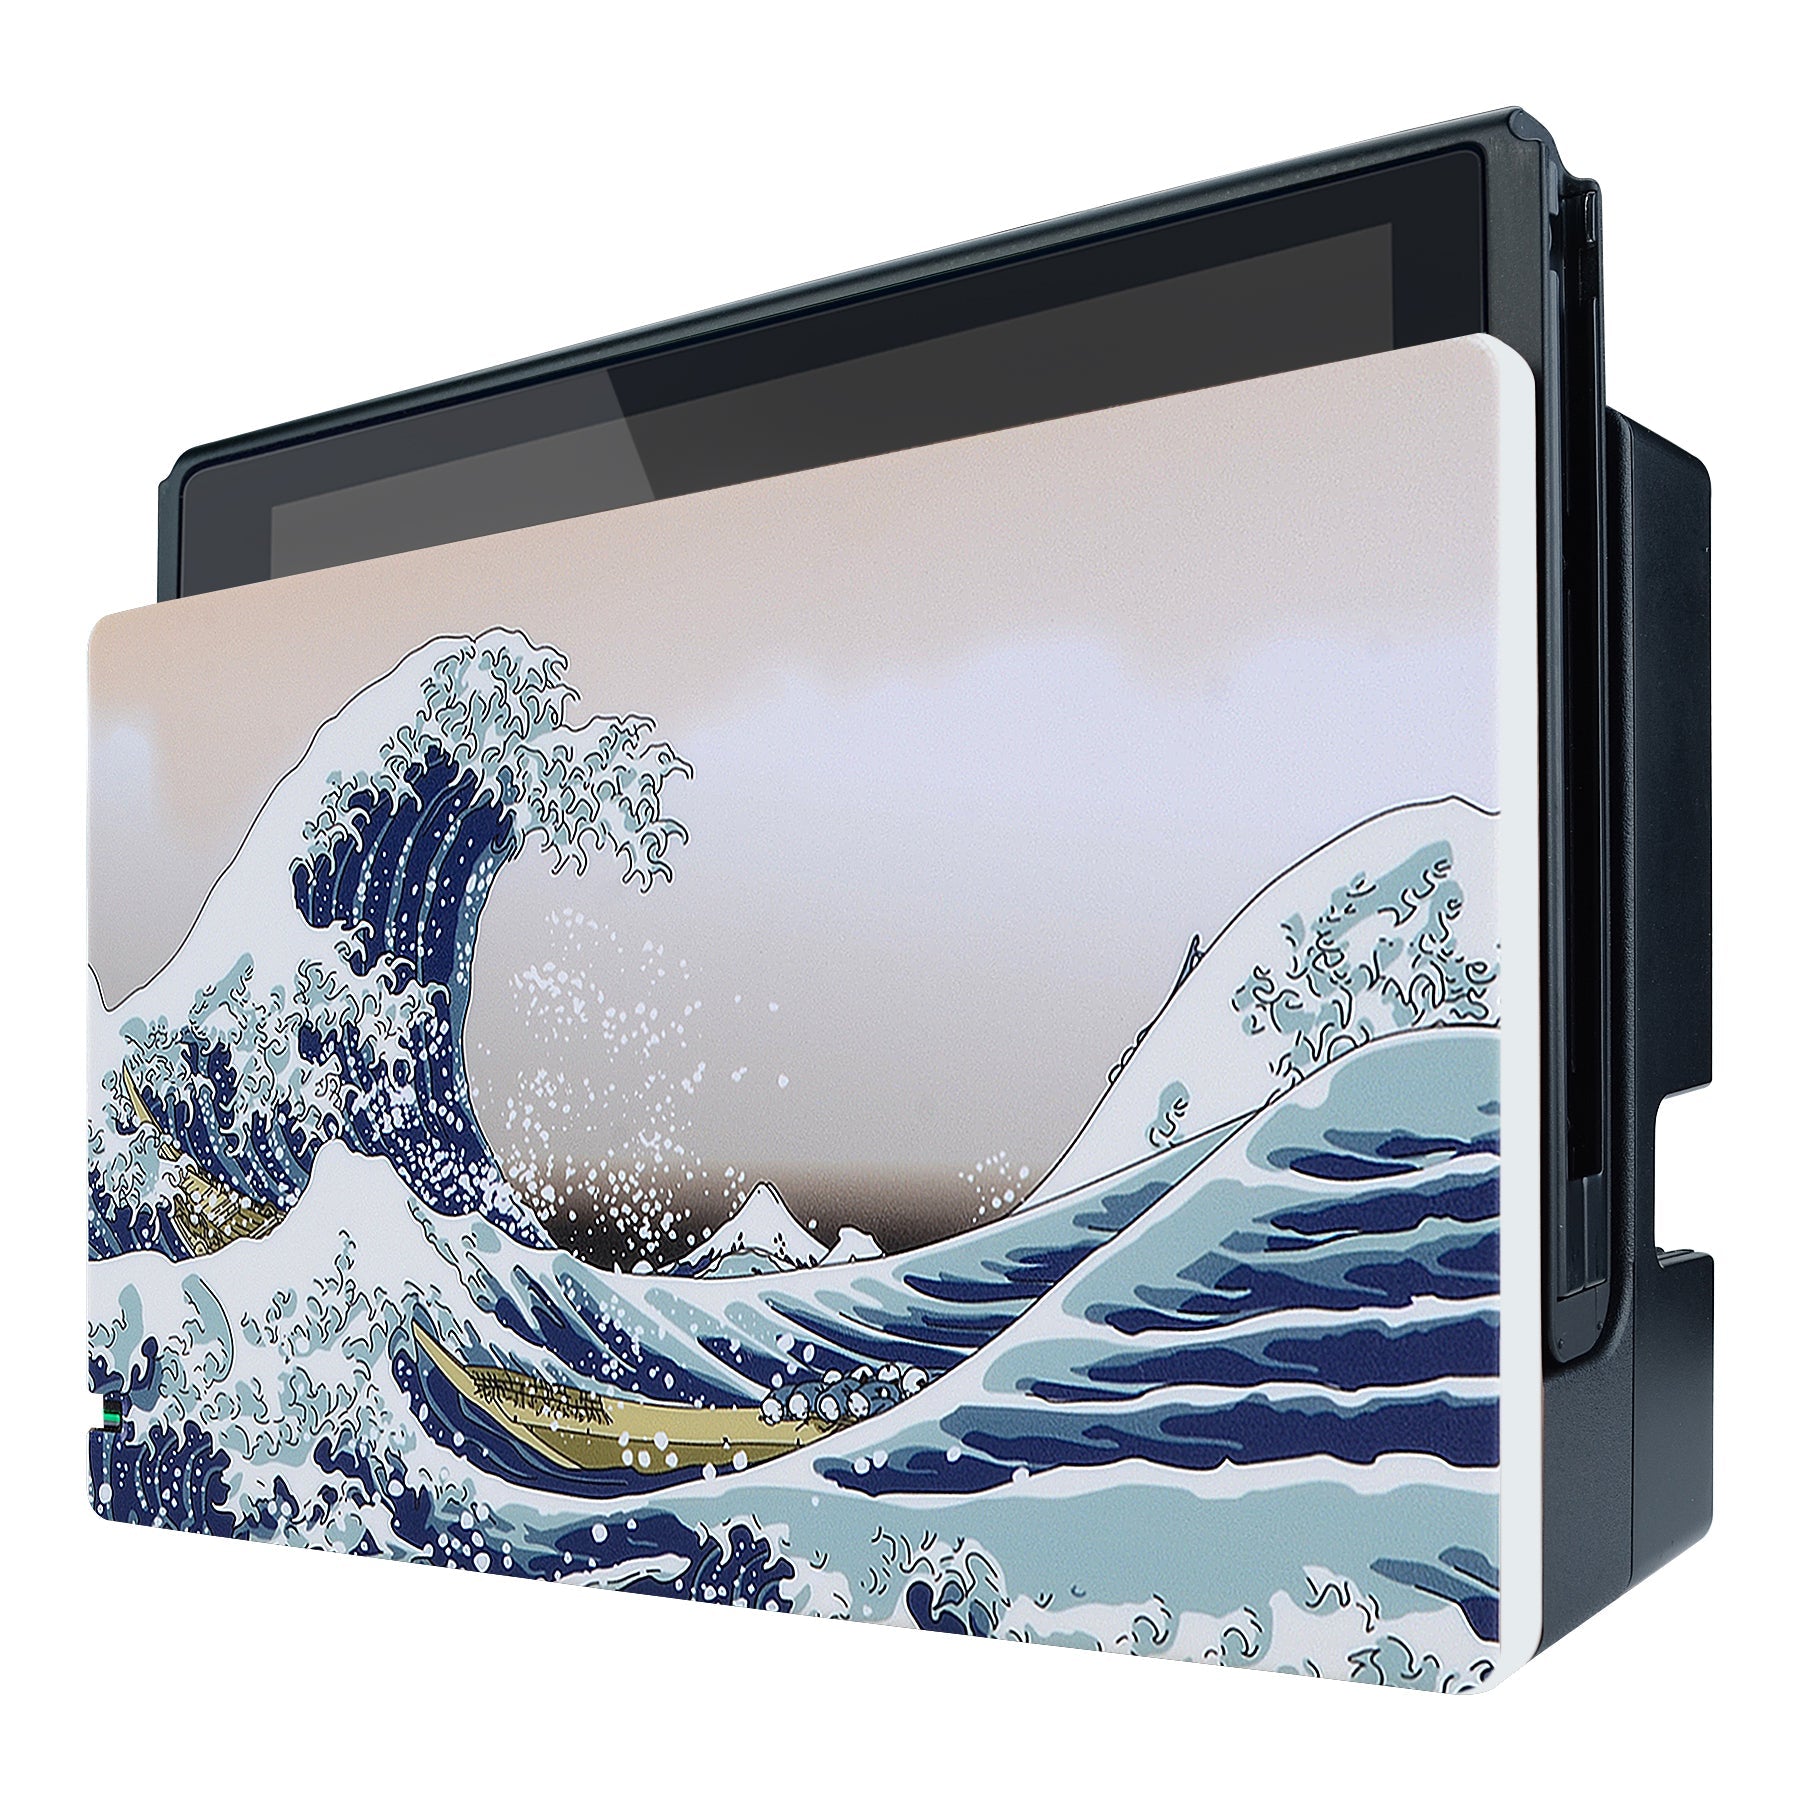 PlayVital The Great Wave Patterned Custom Protective Case for NS Switch Charging Dock, Dust Anti Scratch Dust Hard Cover for NS Switch Dock - Dock NOT Included - NTG7001 PlayVital